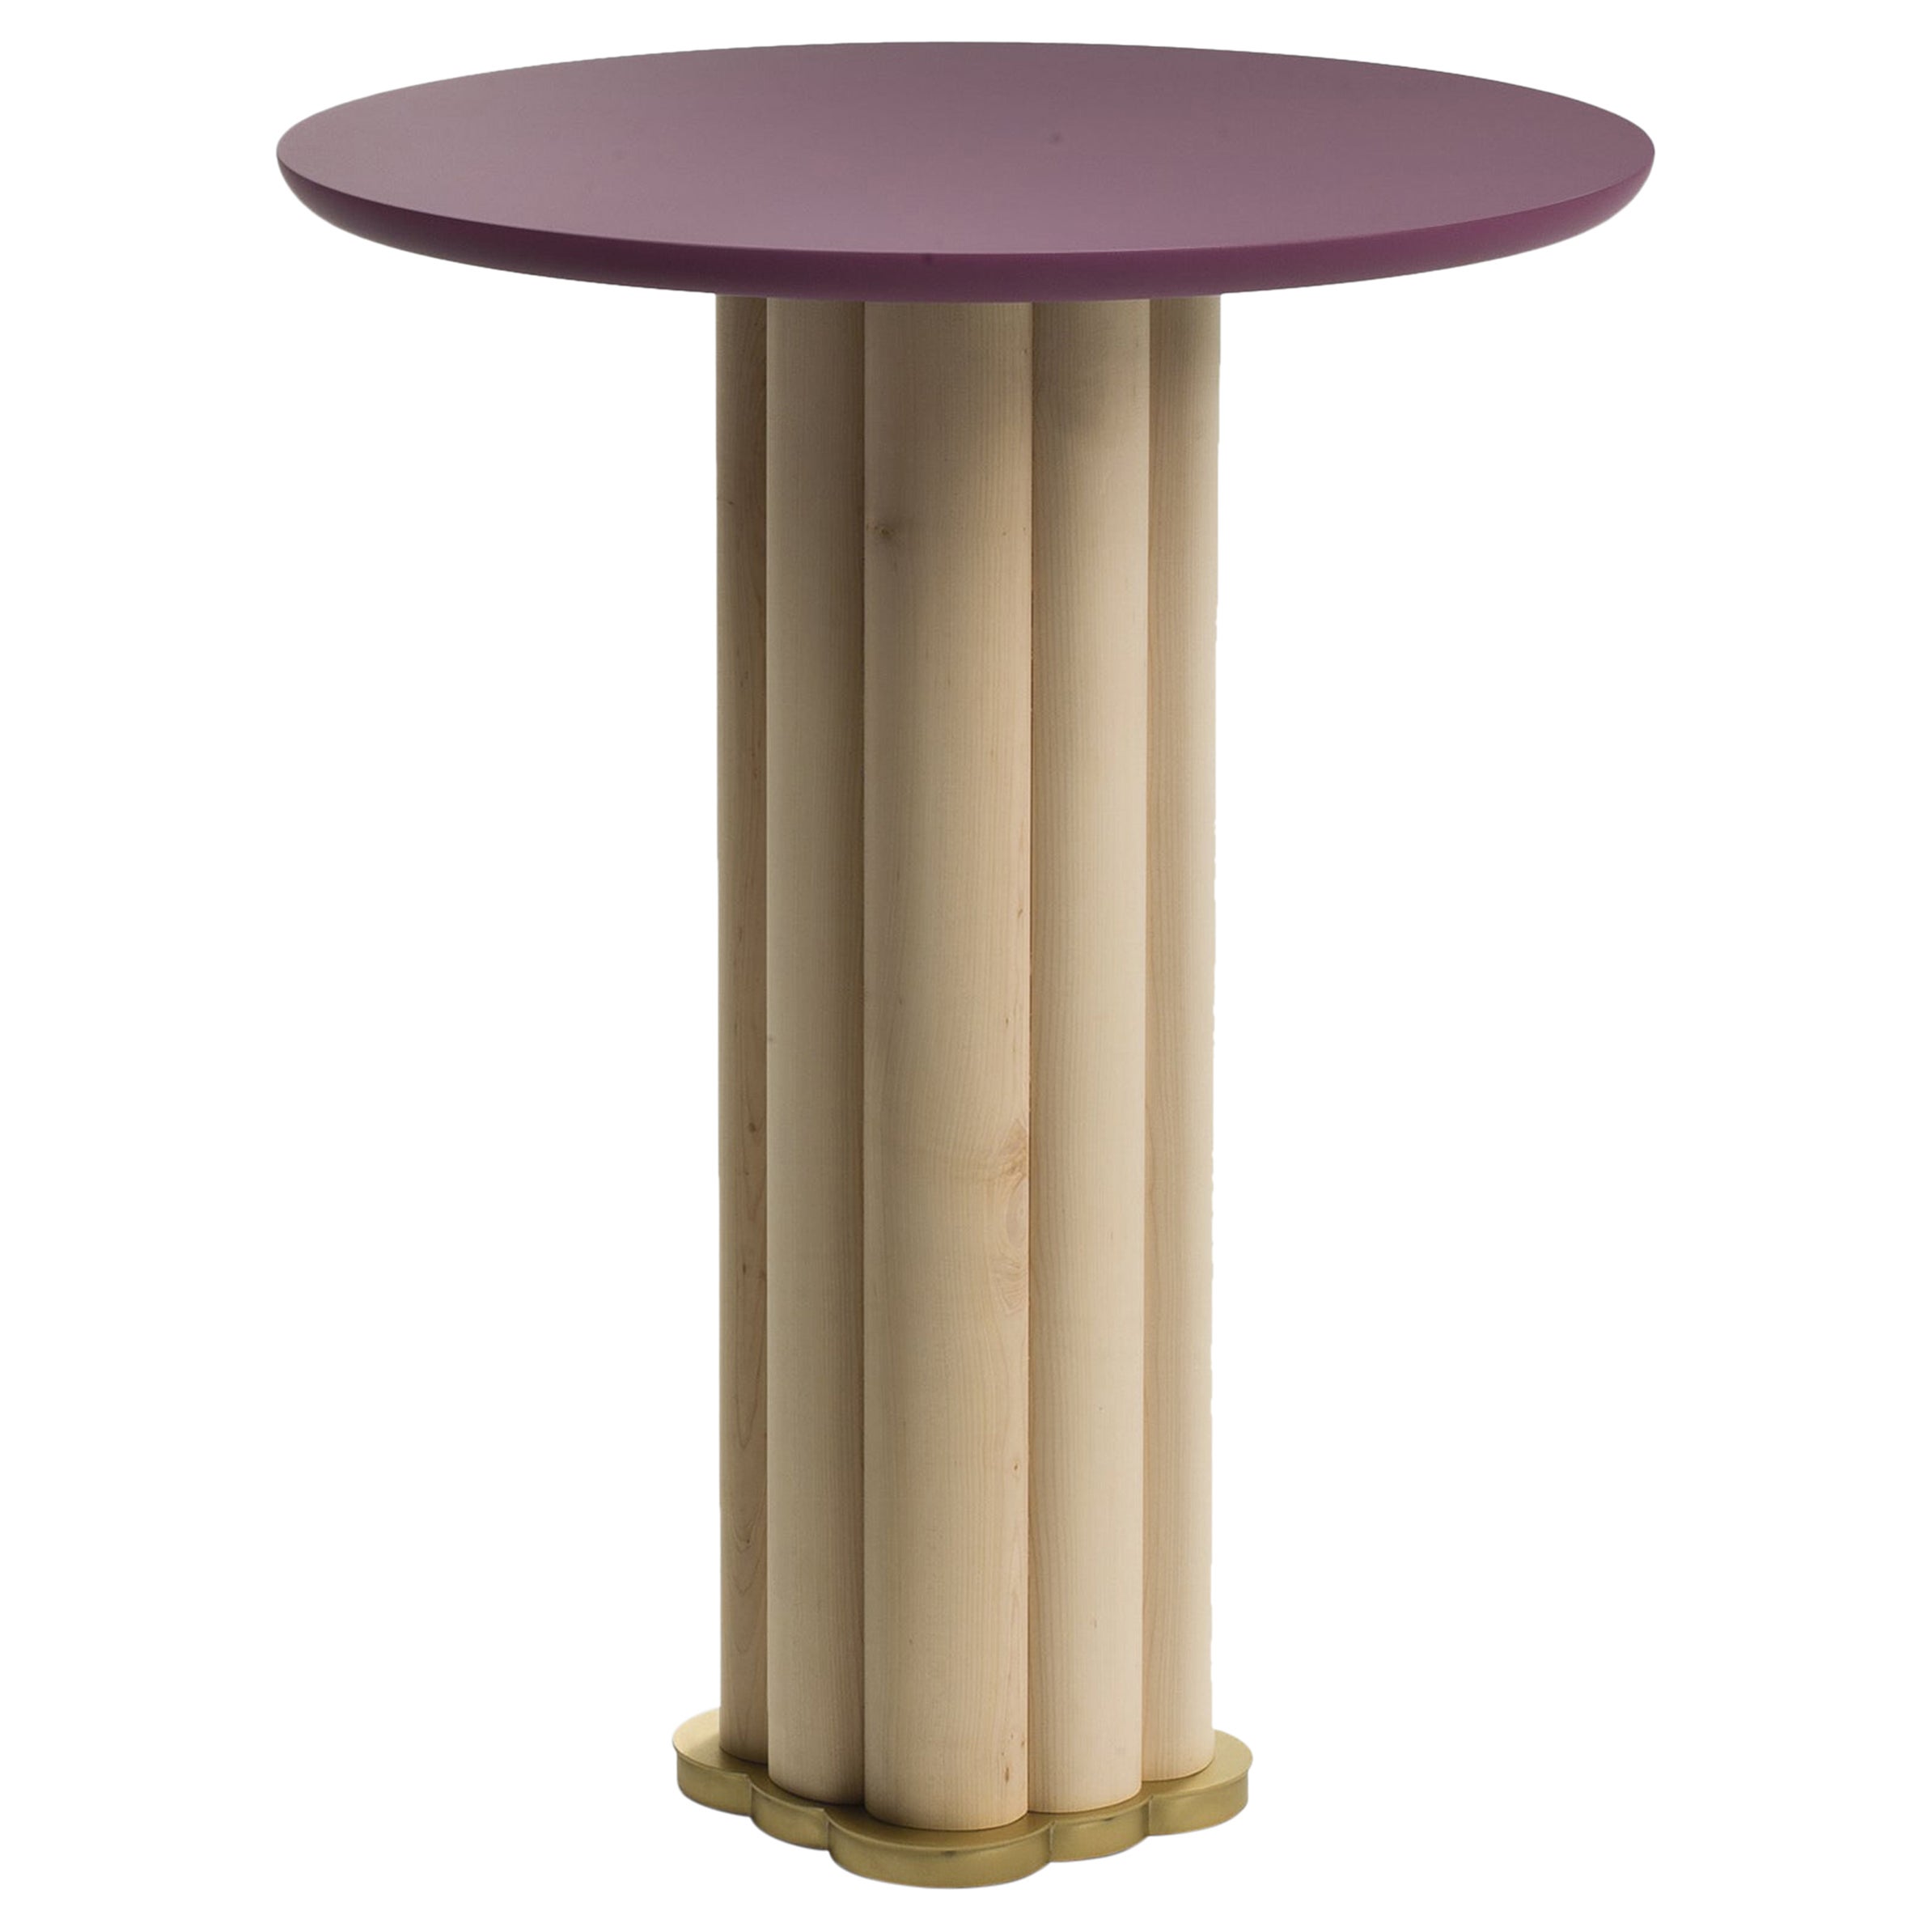 FLO Violet High Table in Maple Wood and Satin Brass Lacquered